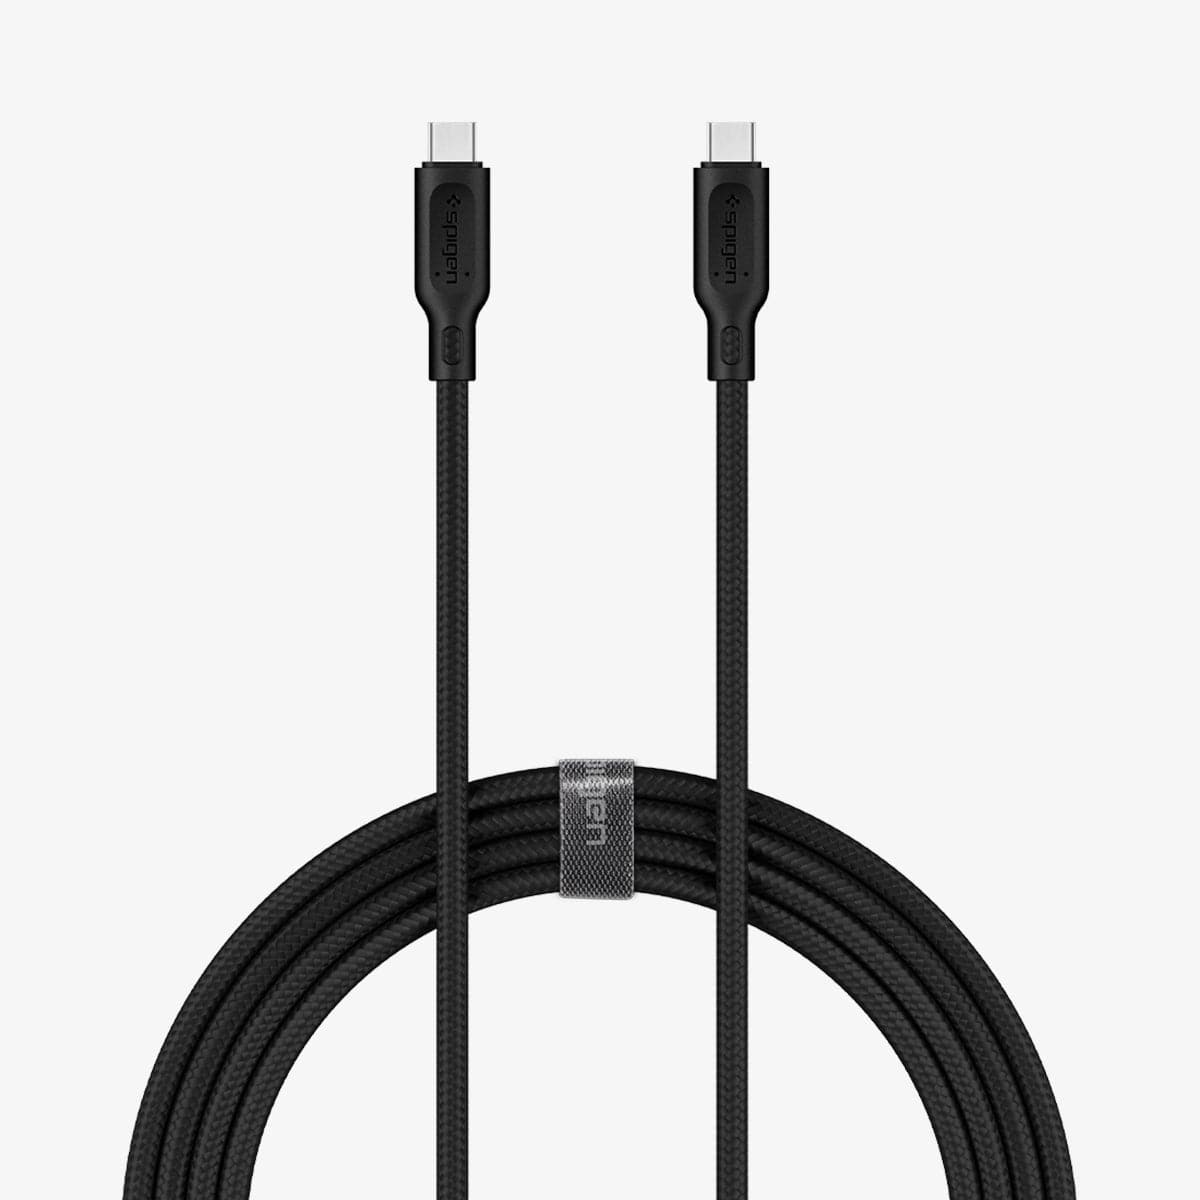 000CA25702 - DuraSync USB-C to USB-C 2.0 showing both ends of the cable and cable organized